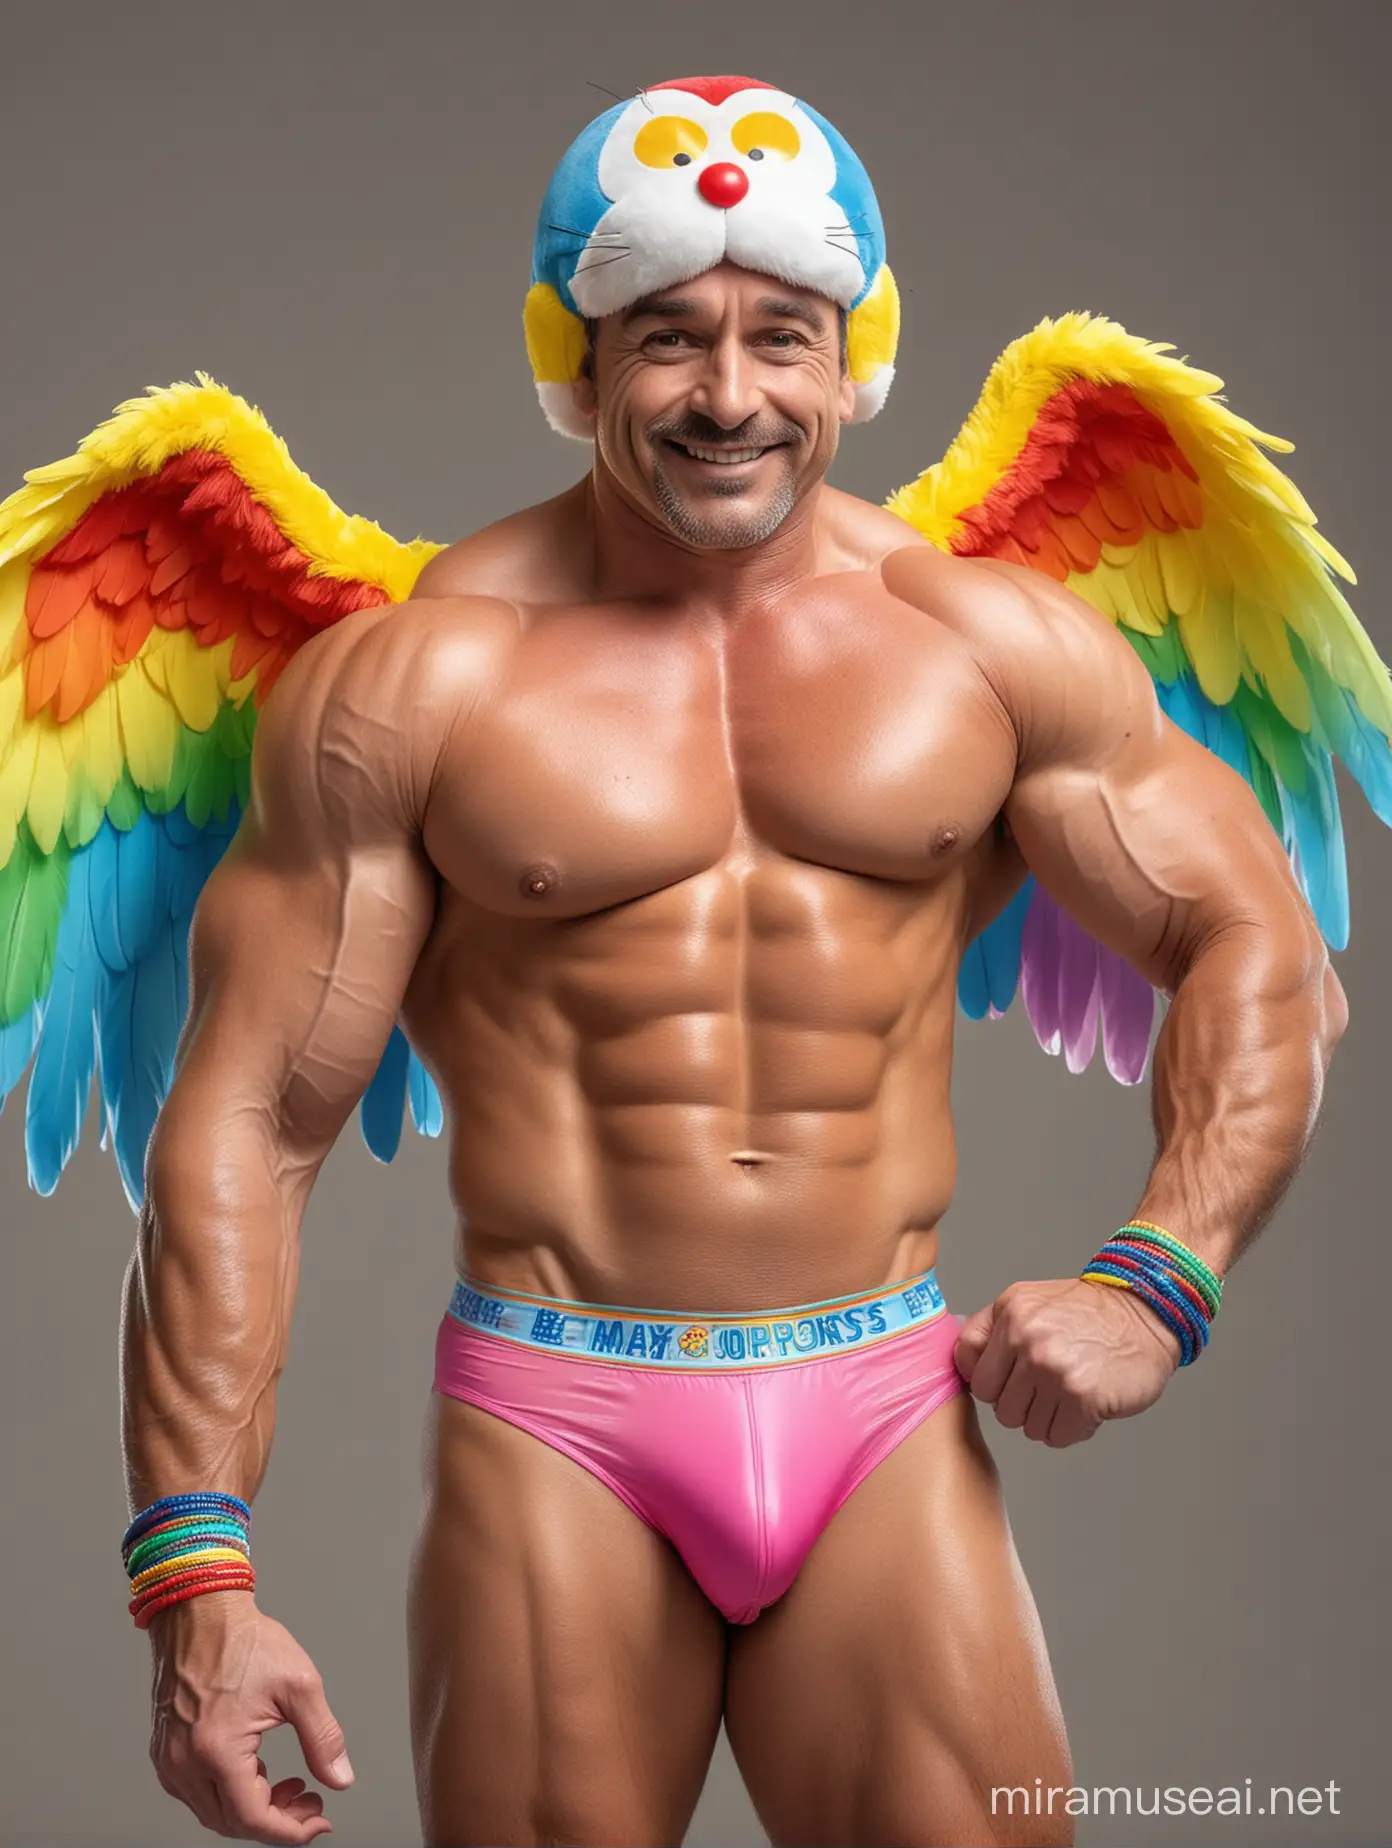 Muscular 40s Bodybuilder Flexing with Rainbow Colored Wings and Doraemon